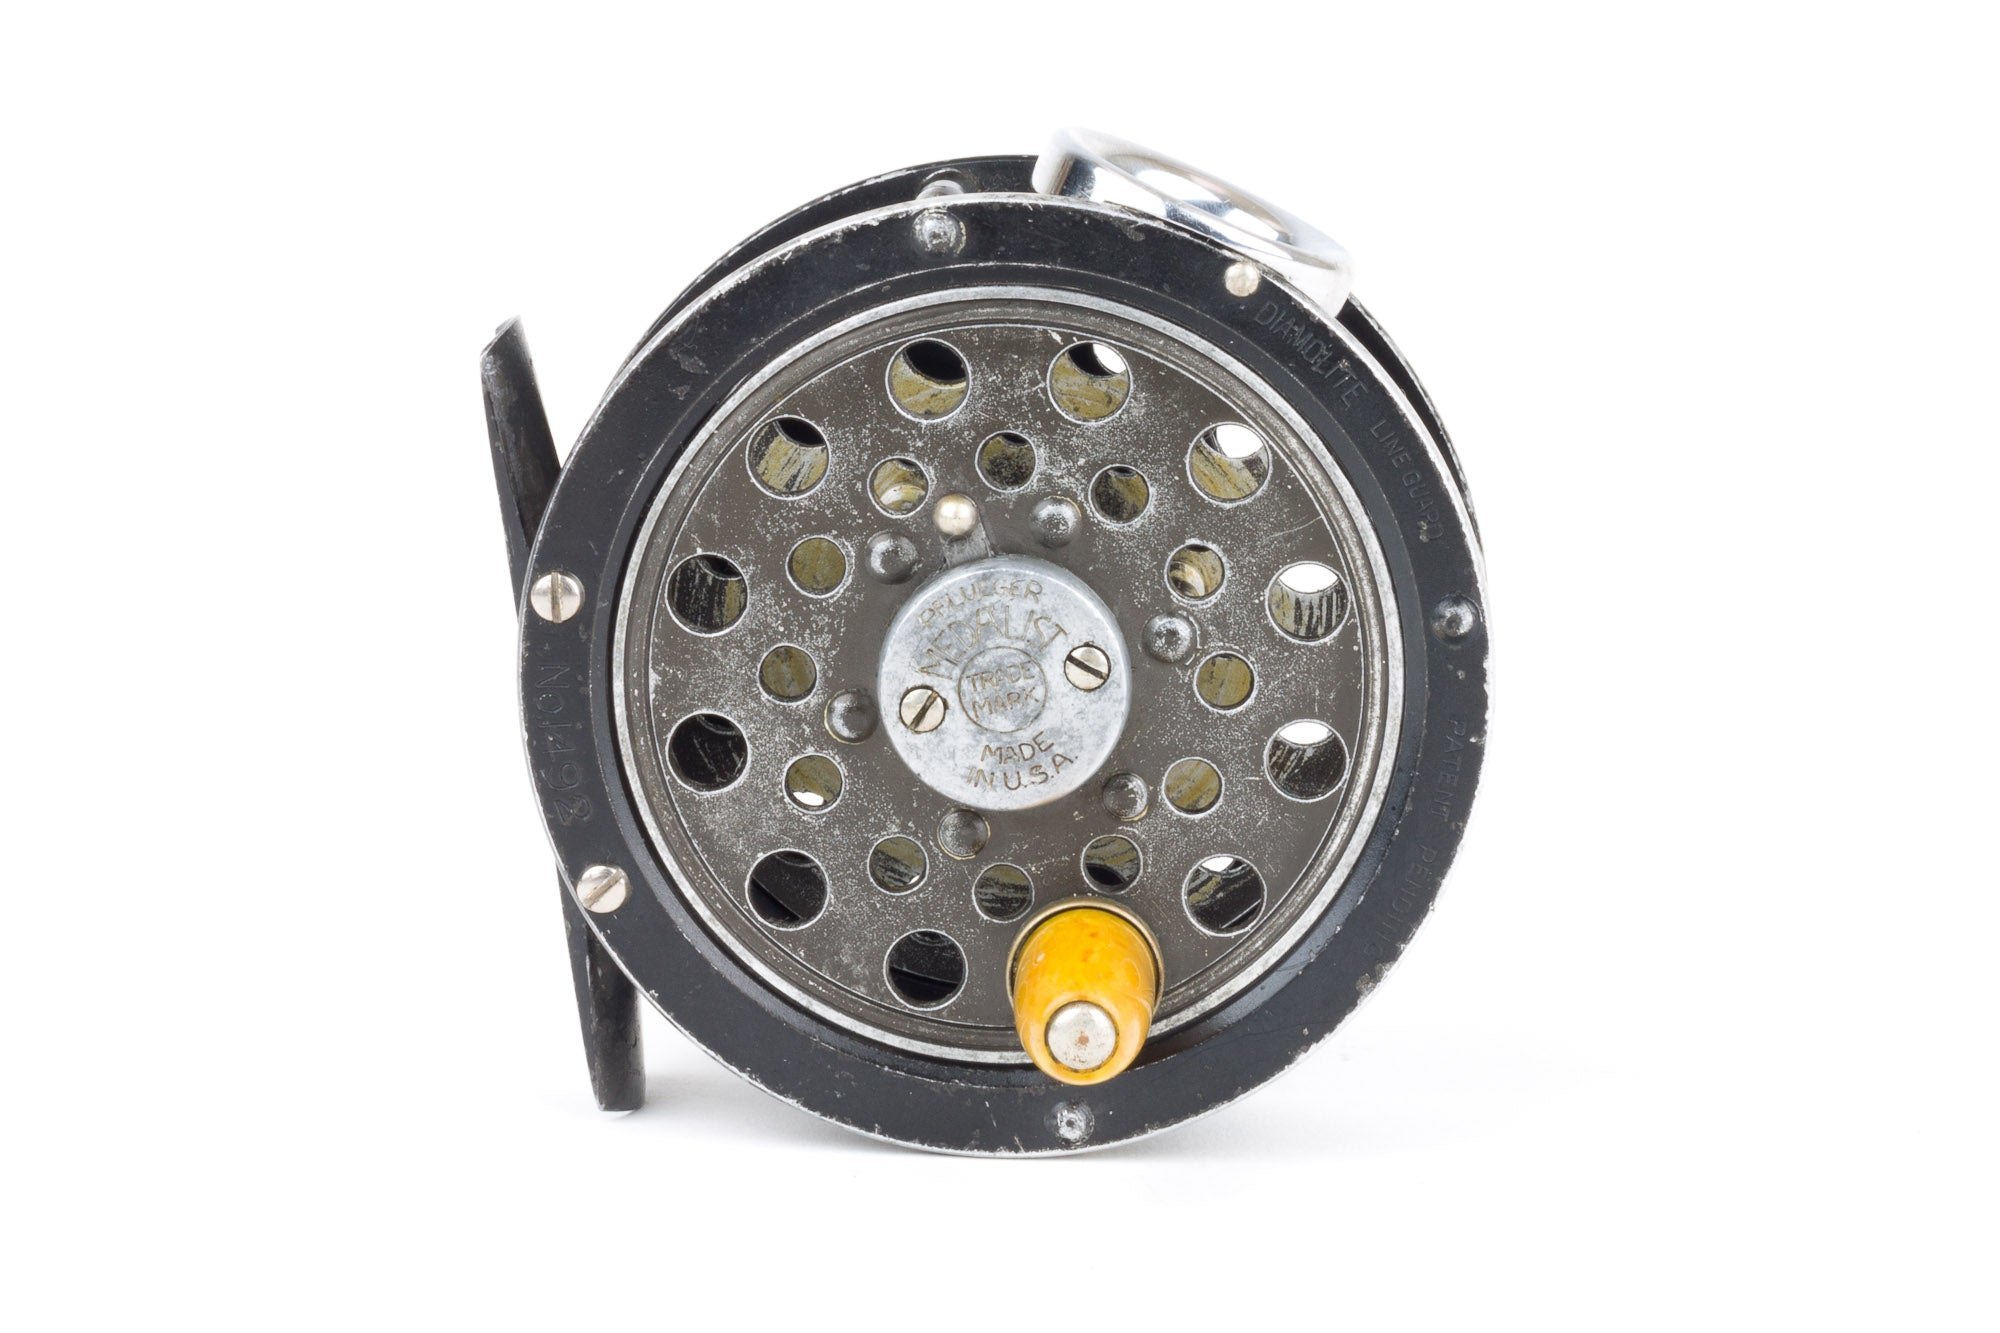 American Eagle Reels Introduces New Fly Reels, Press Releases